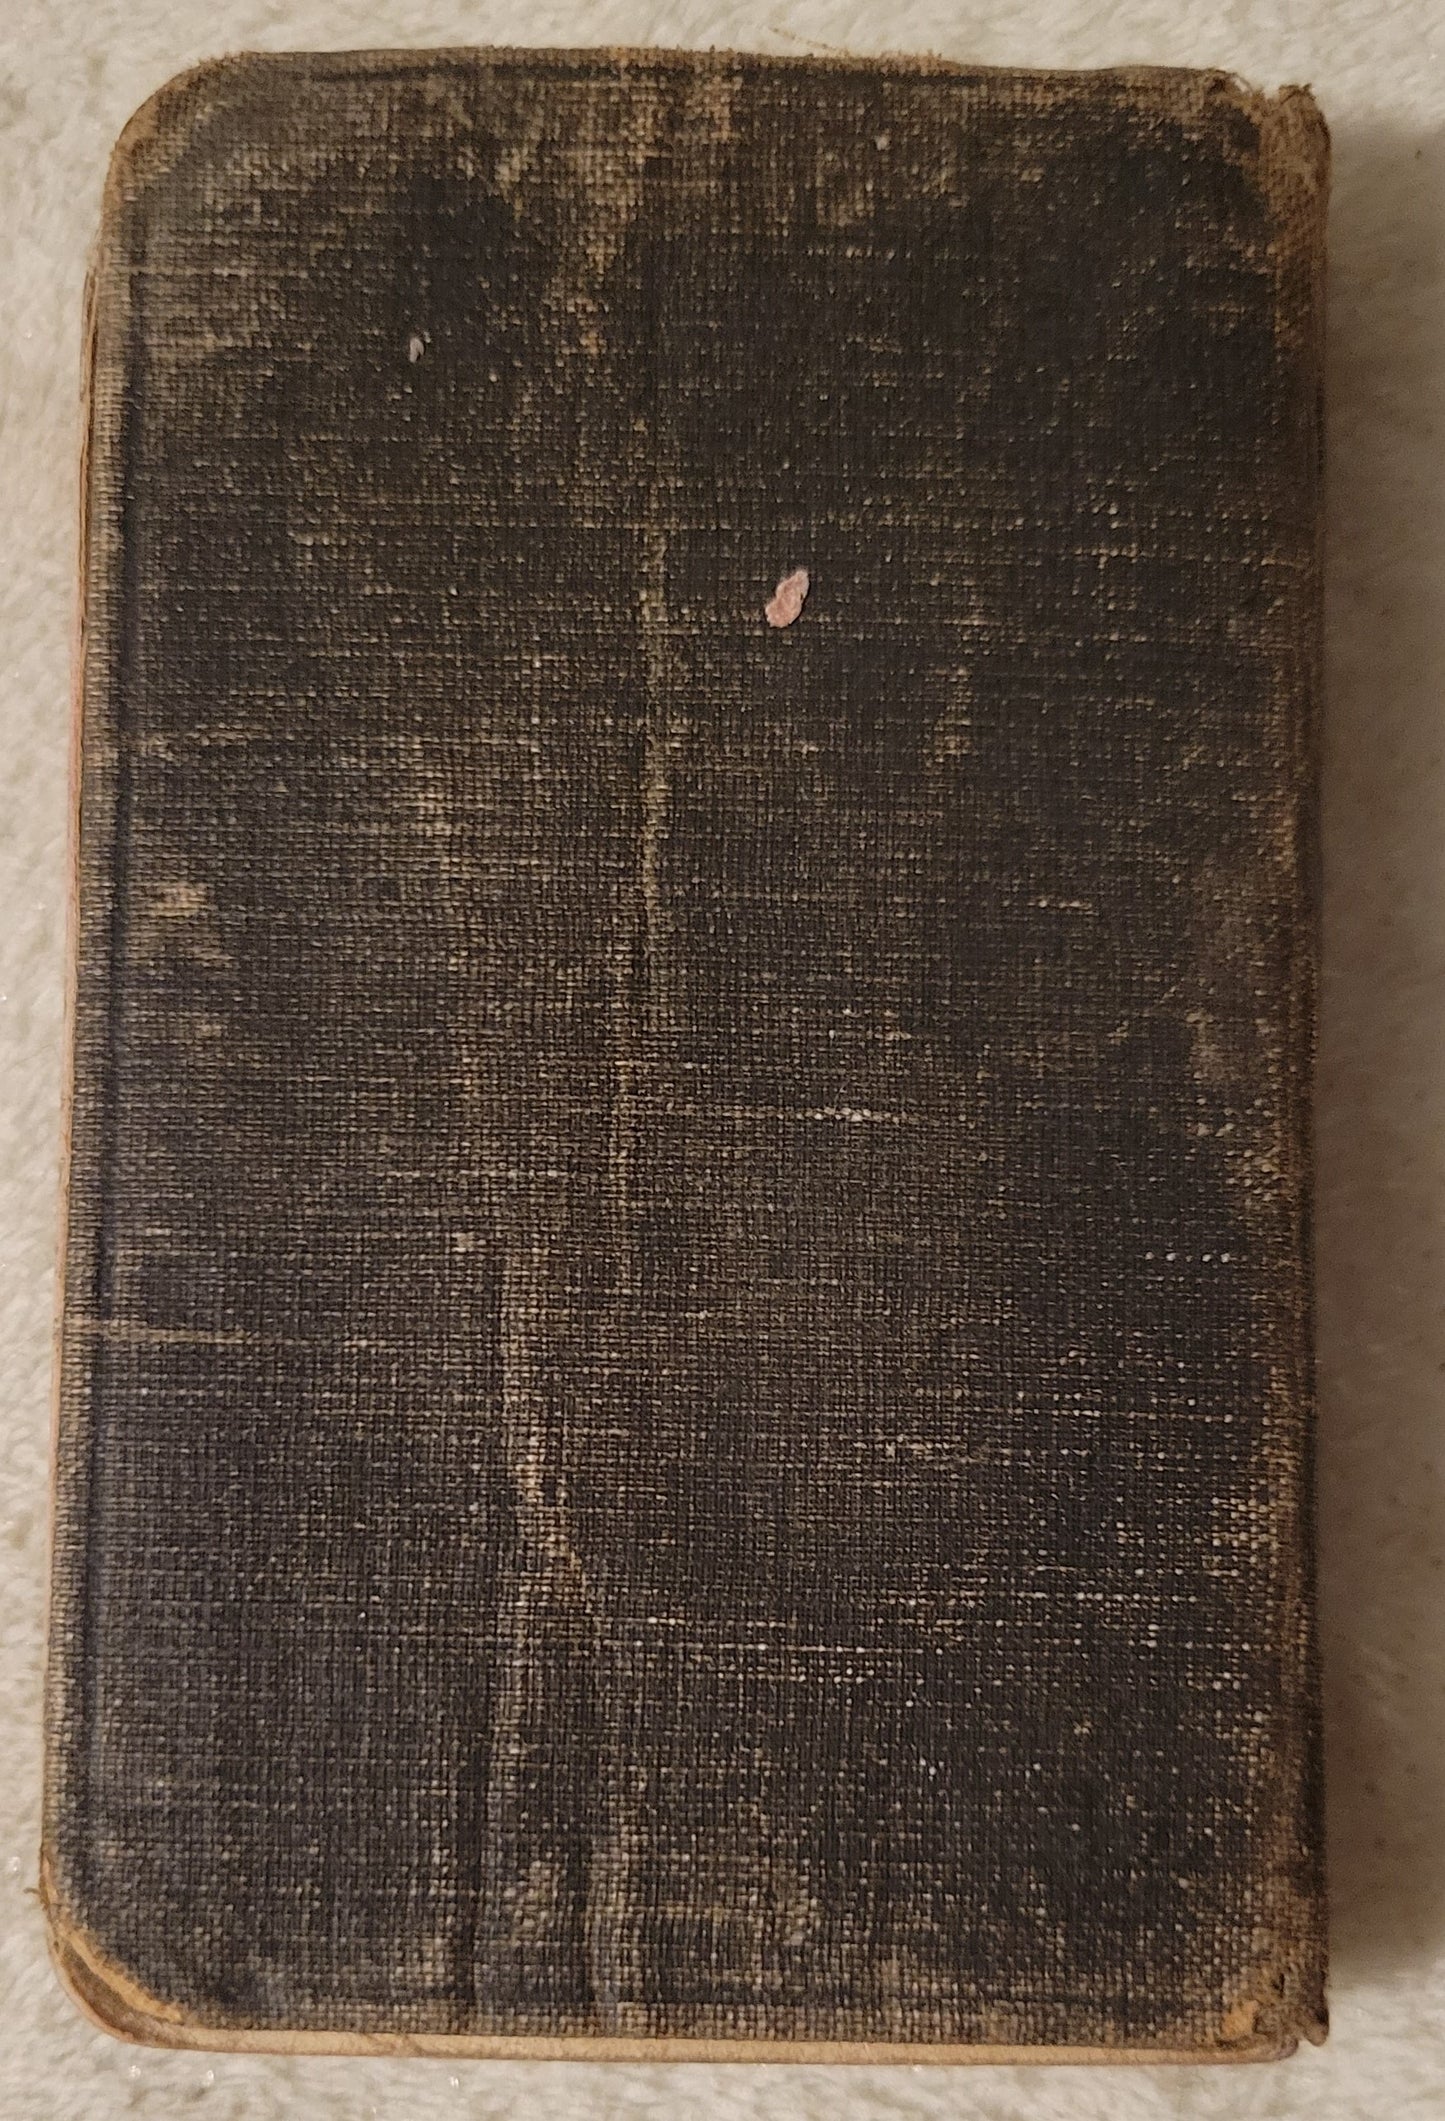 Antique book for sale, illustrated New Testament, 1918.  View of back cover.